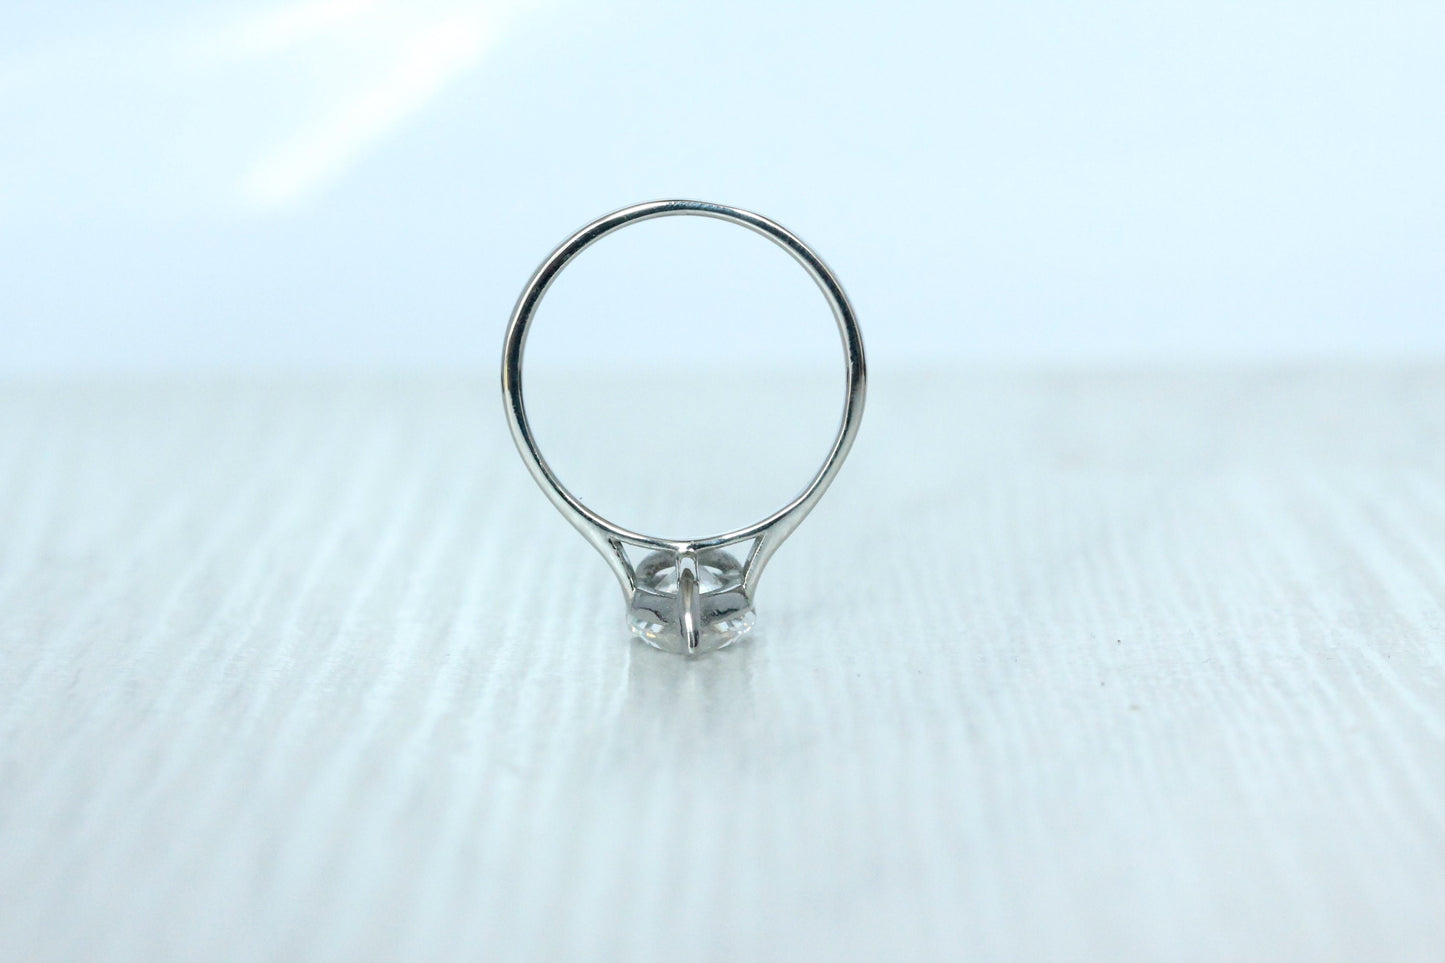 1.7ct Pear Cut Solitaire cathedral ring in Titanium or White Gold - Moissanite or Simulated diamond